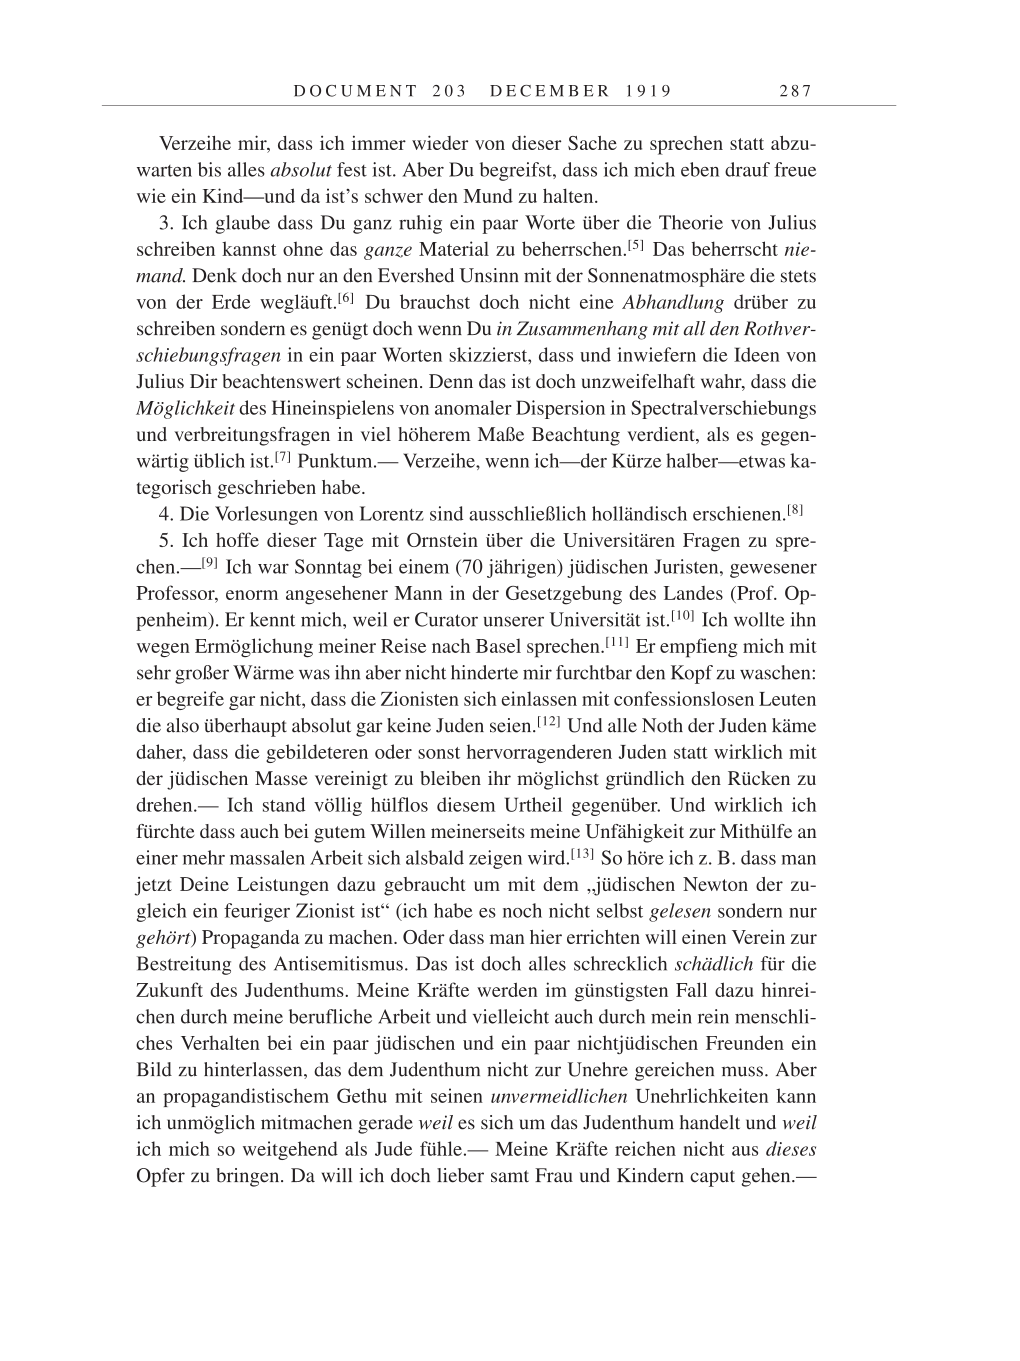 Volume 9: The Berlin Years: Correspondence January 1919-April 1920 page 287